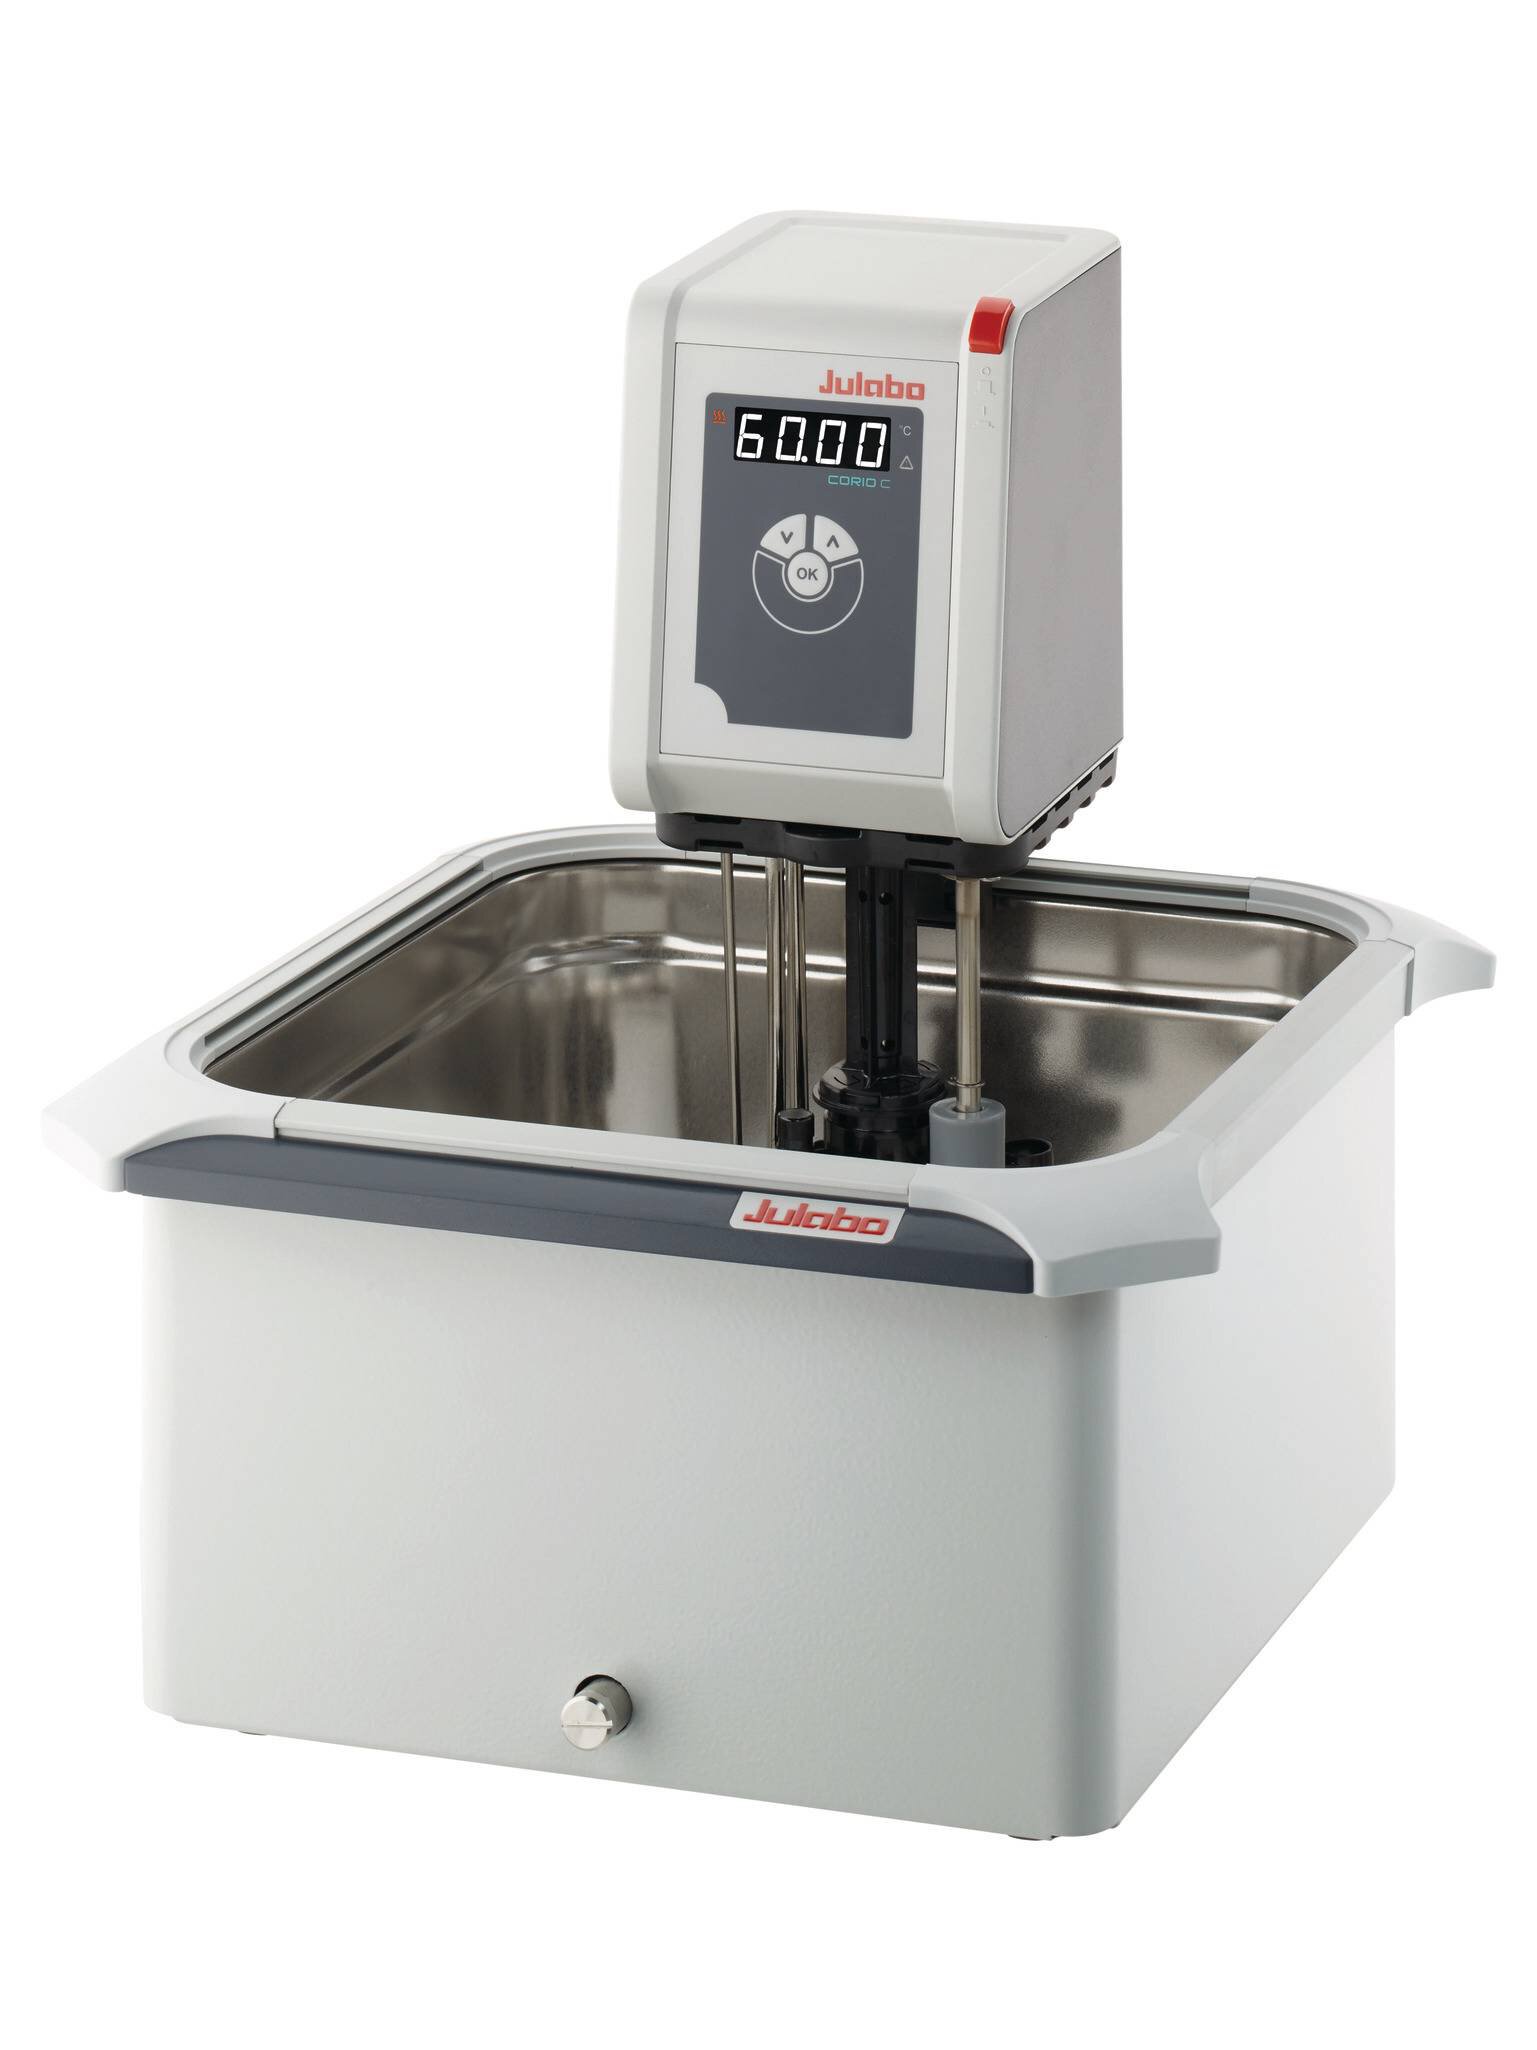 Open heating bath circulator with stainless steel bath tank CORIO C-B13 from JULABO view 1